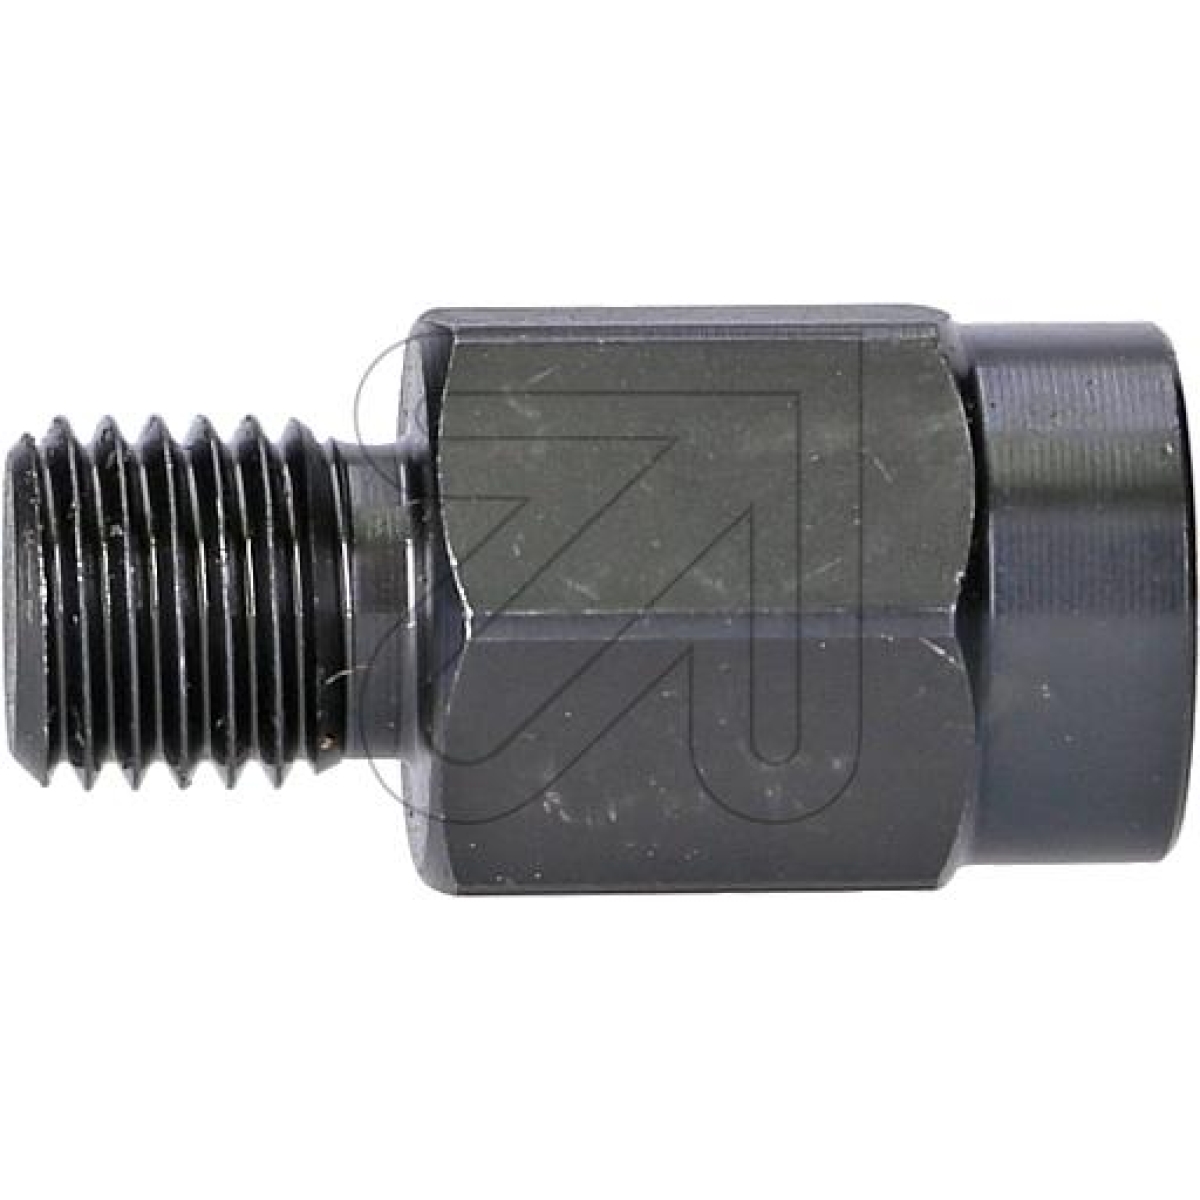 DIEWEAdapter female thread. M18x2.5 on M16 spigot for suction 750865 (M16 mount)Article-No: 750825